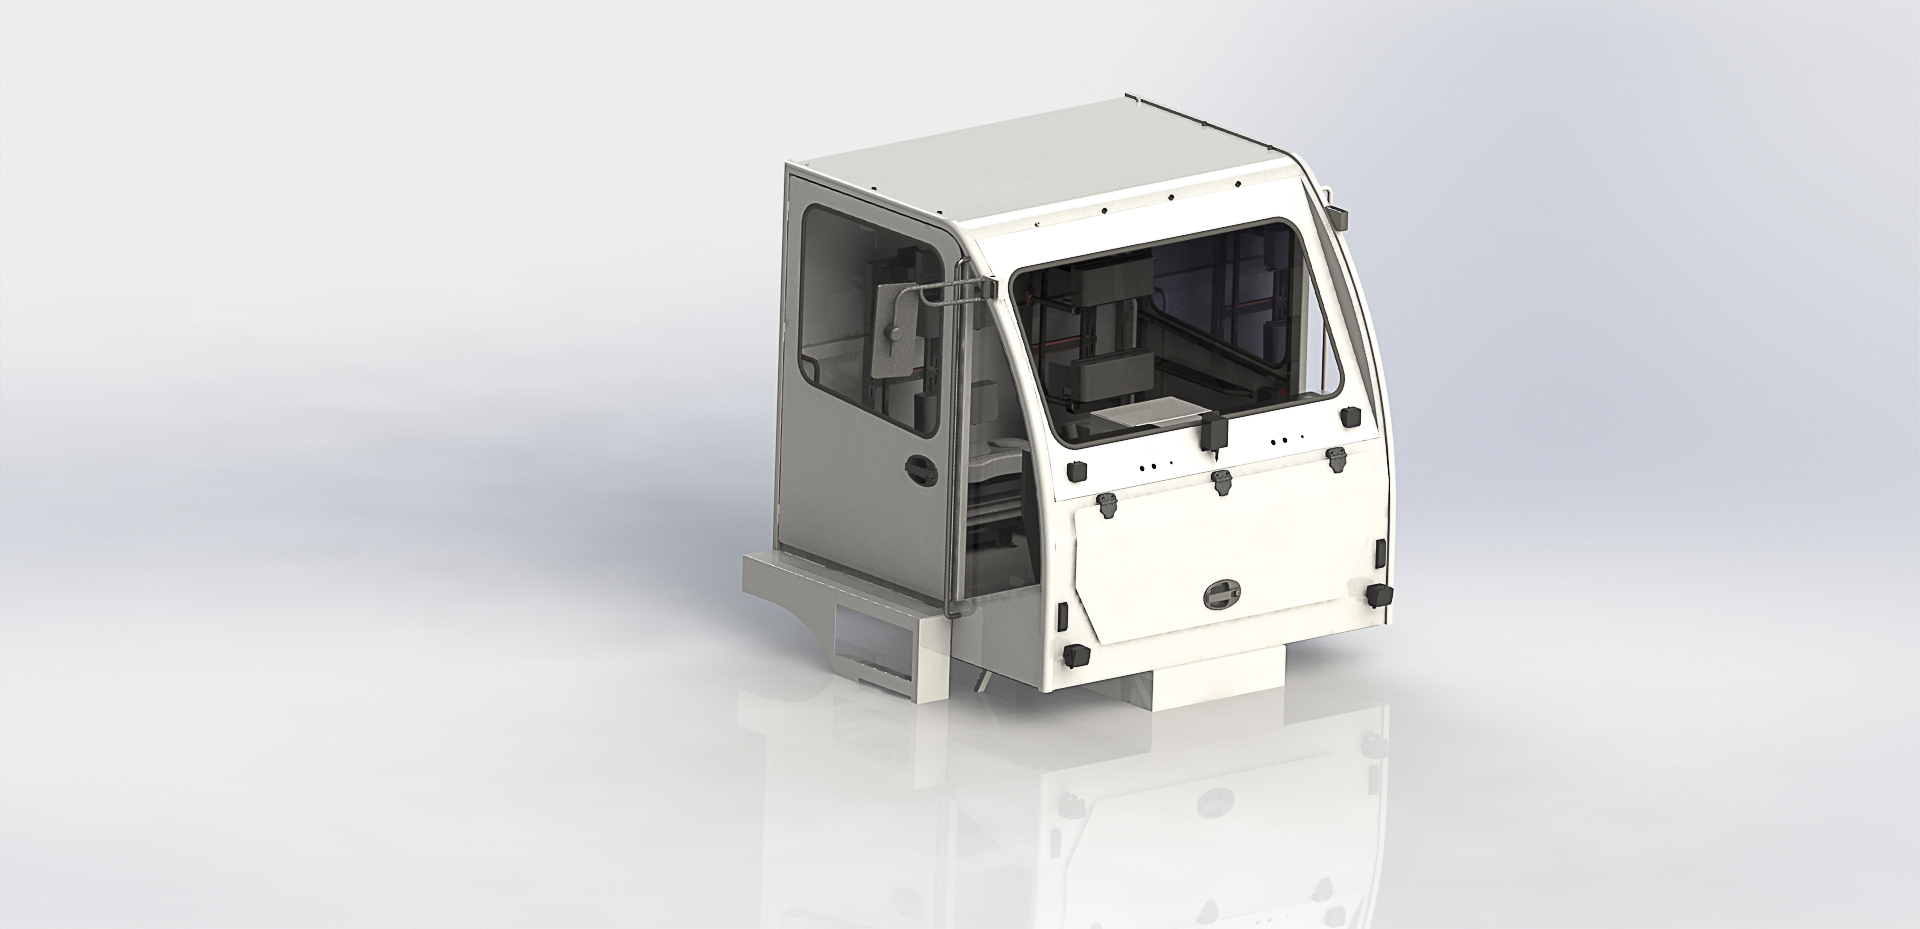 Pressurface cabin for tunnel intervention vehicle